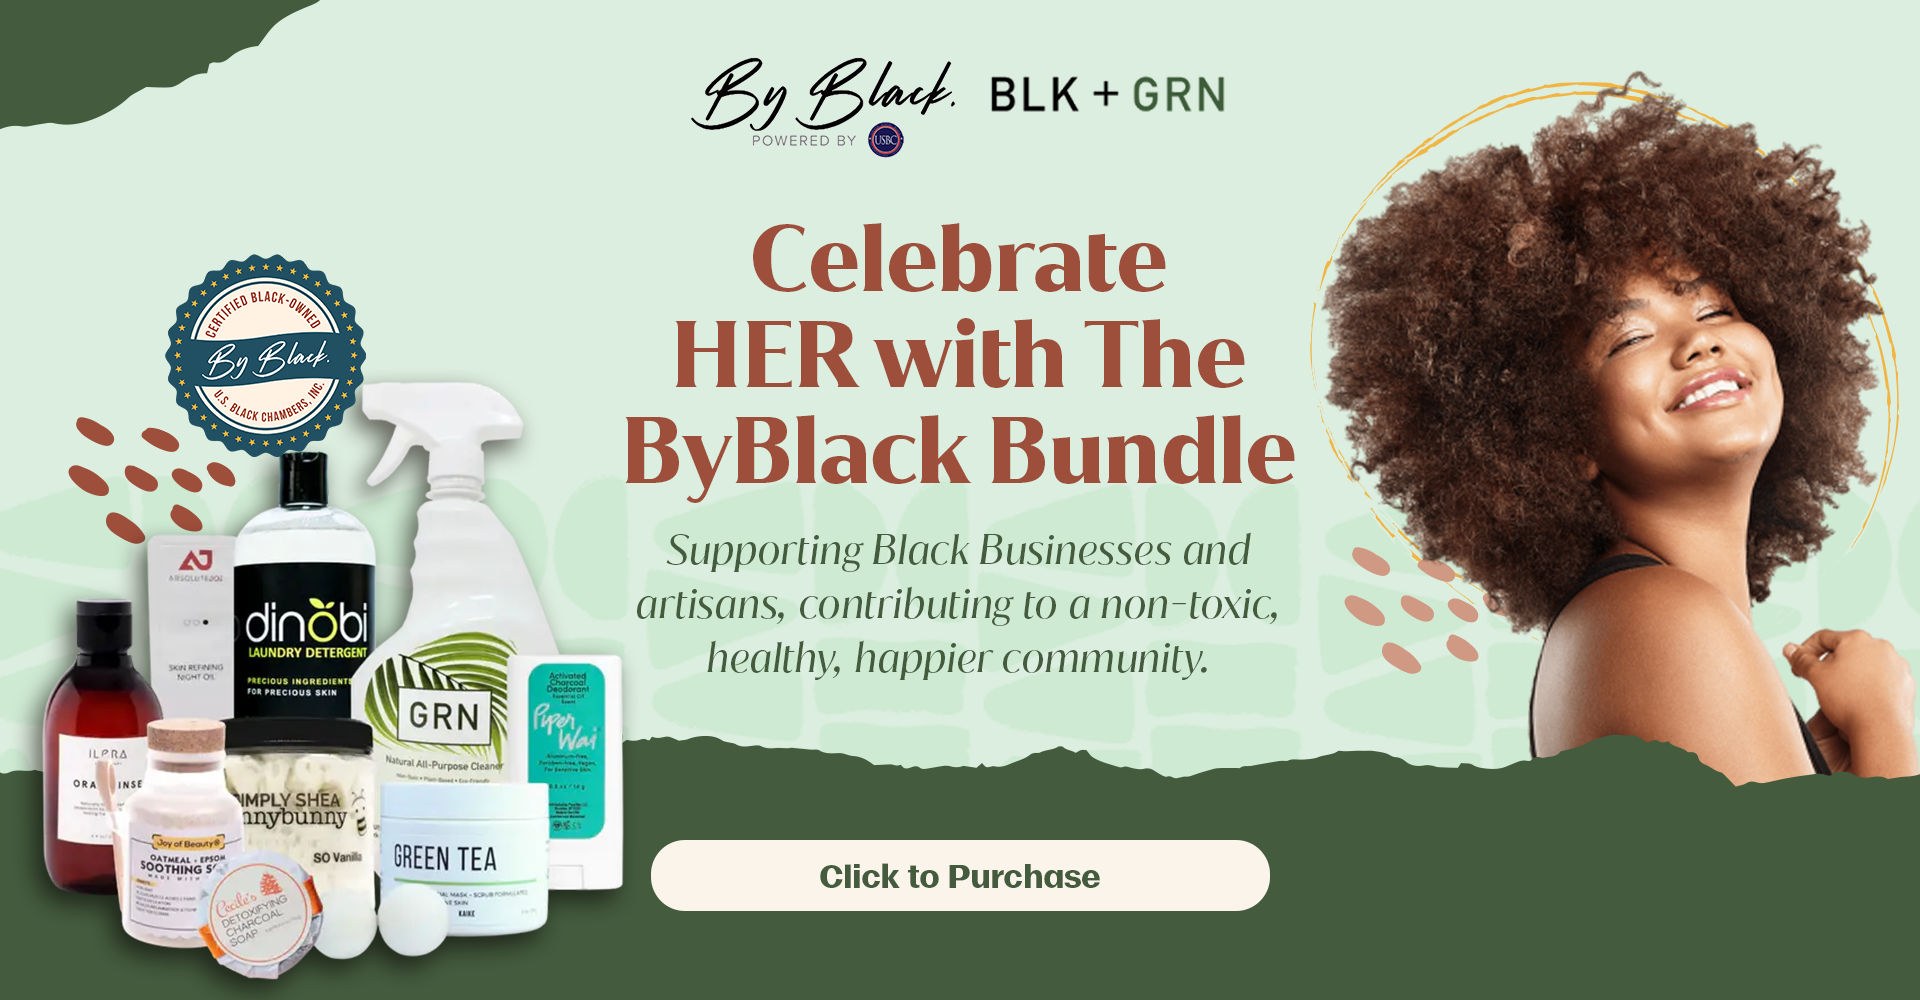 ByBlack Teams Up with BLK + GRN to Boost Black-Owned Businesses with Exclusive ByBlack Bundle